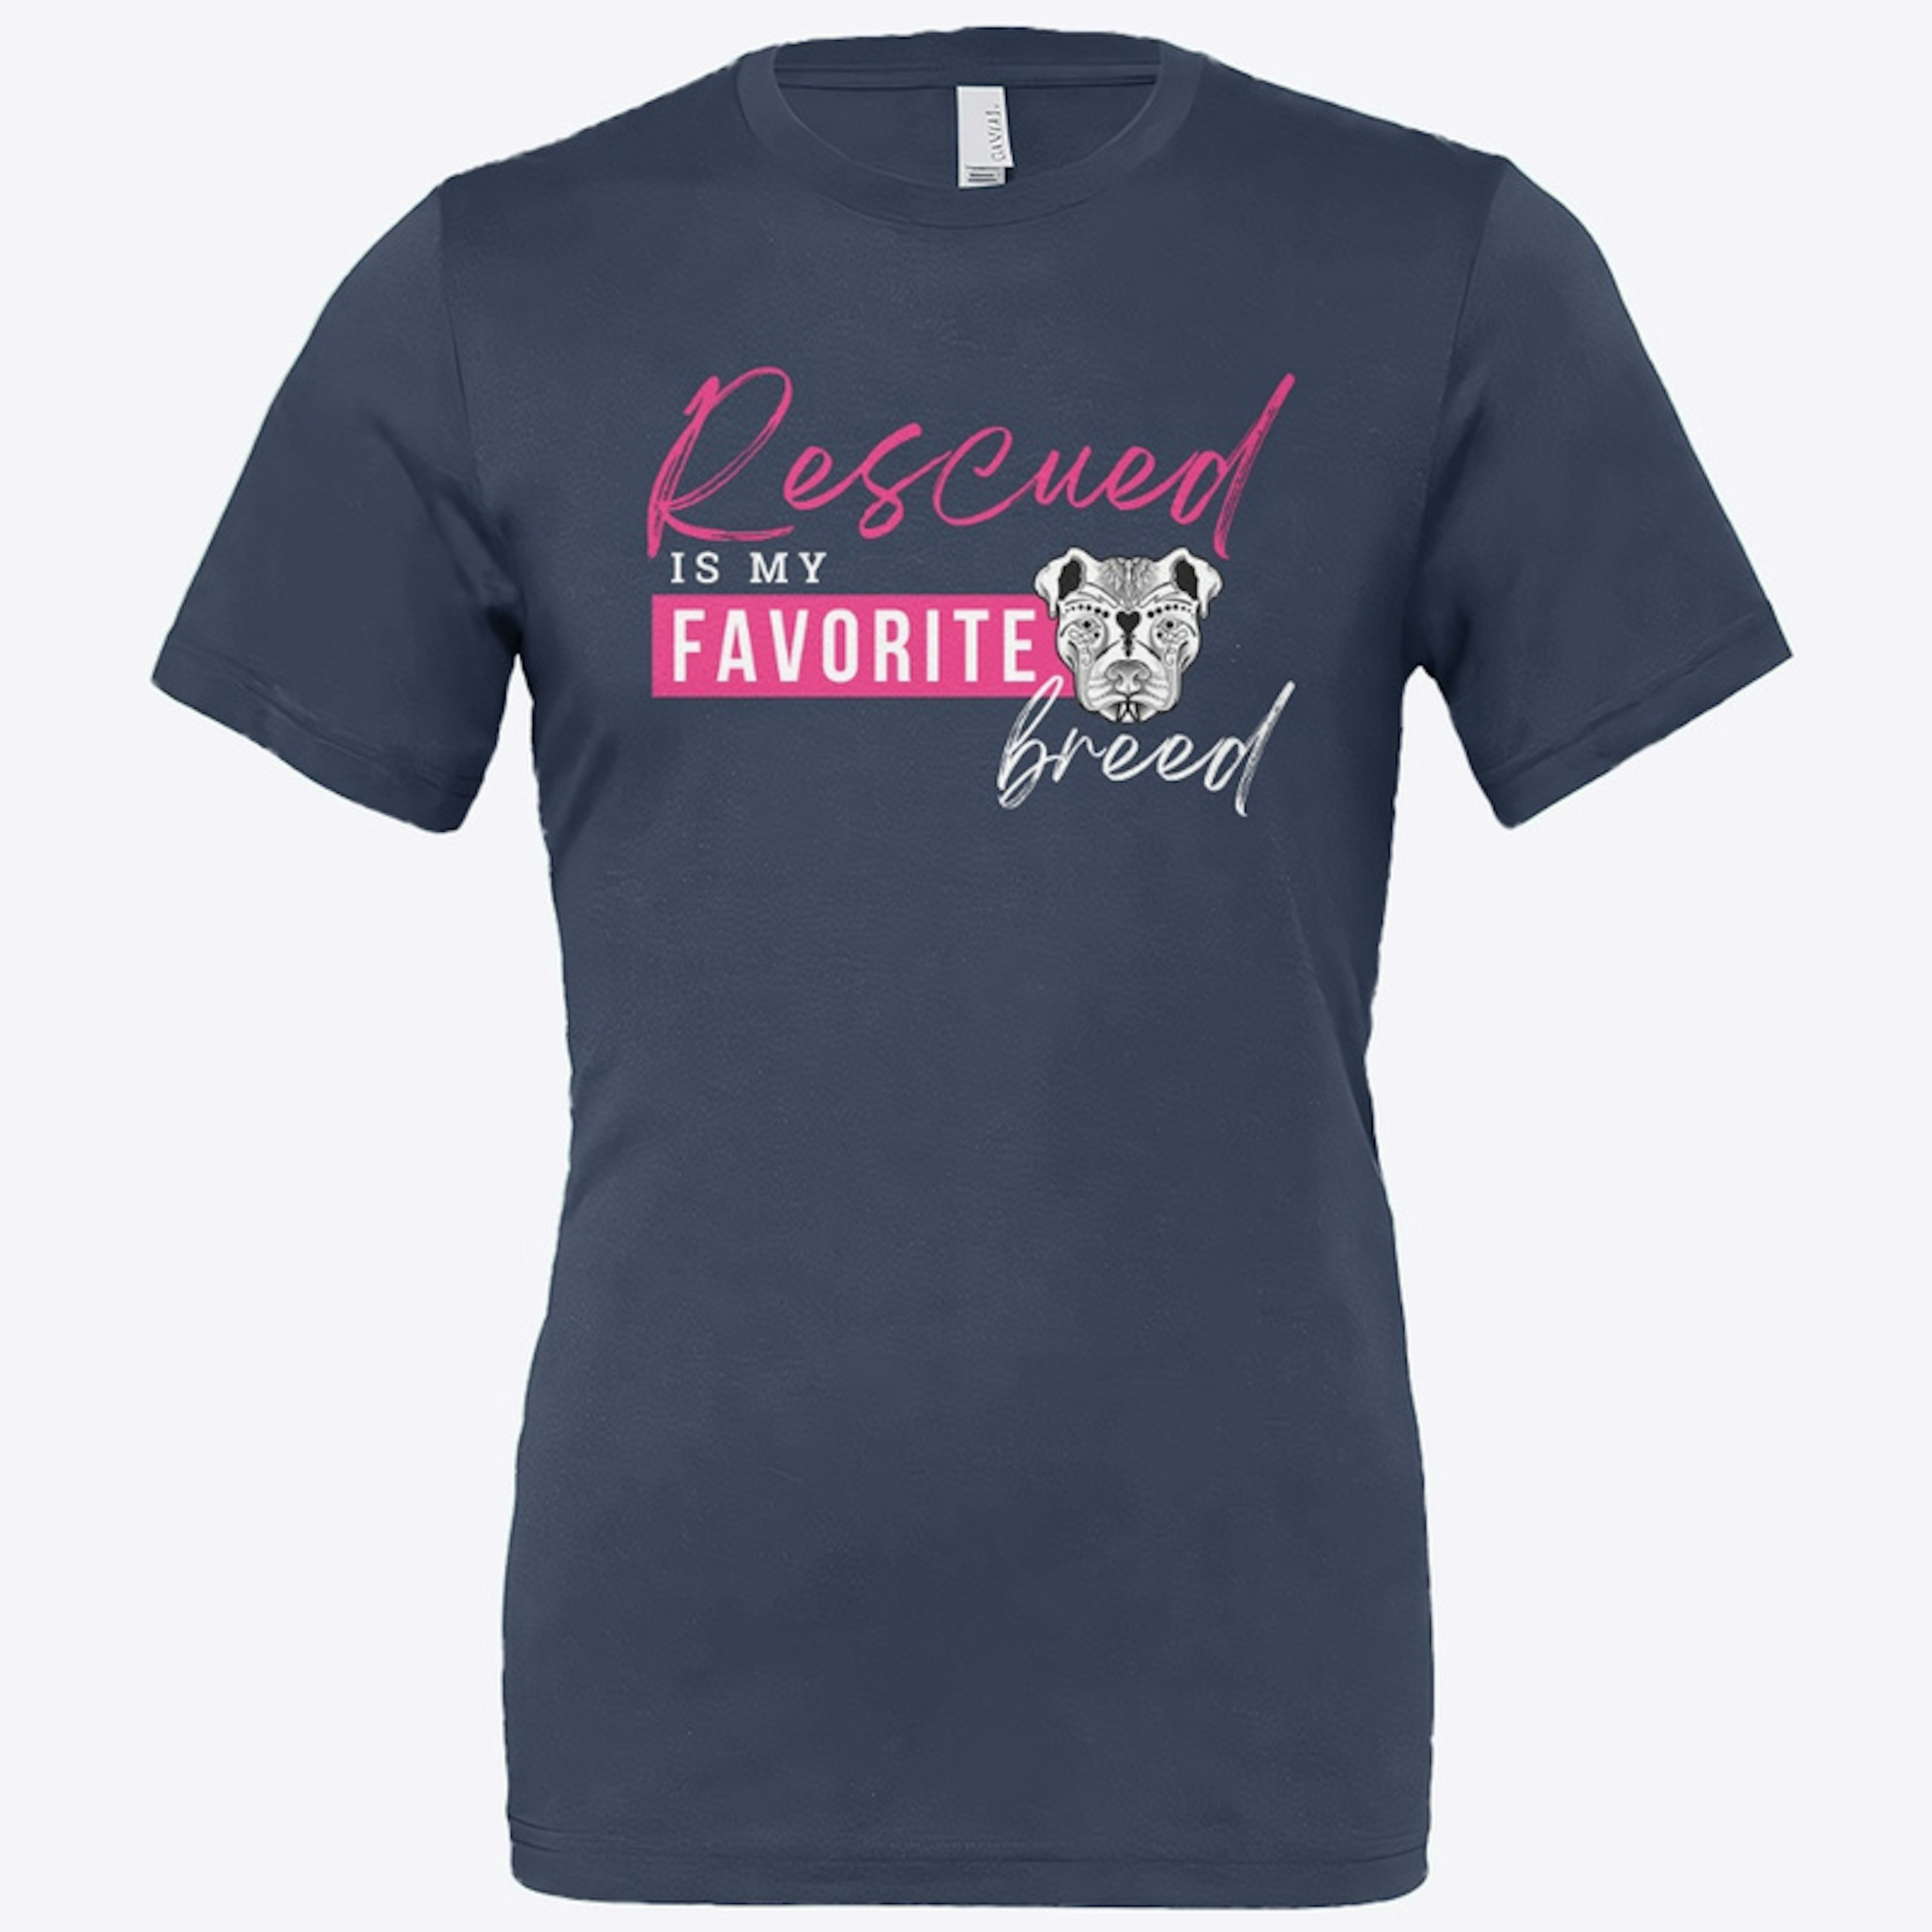 ODHS “Rescued Is My Favorite” T-shirt